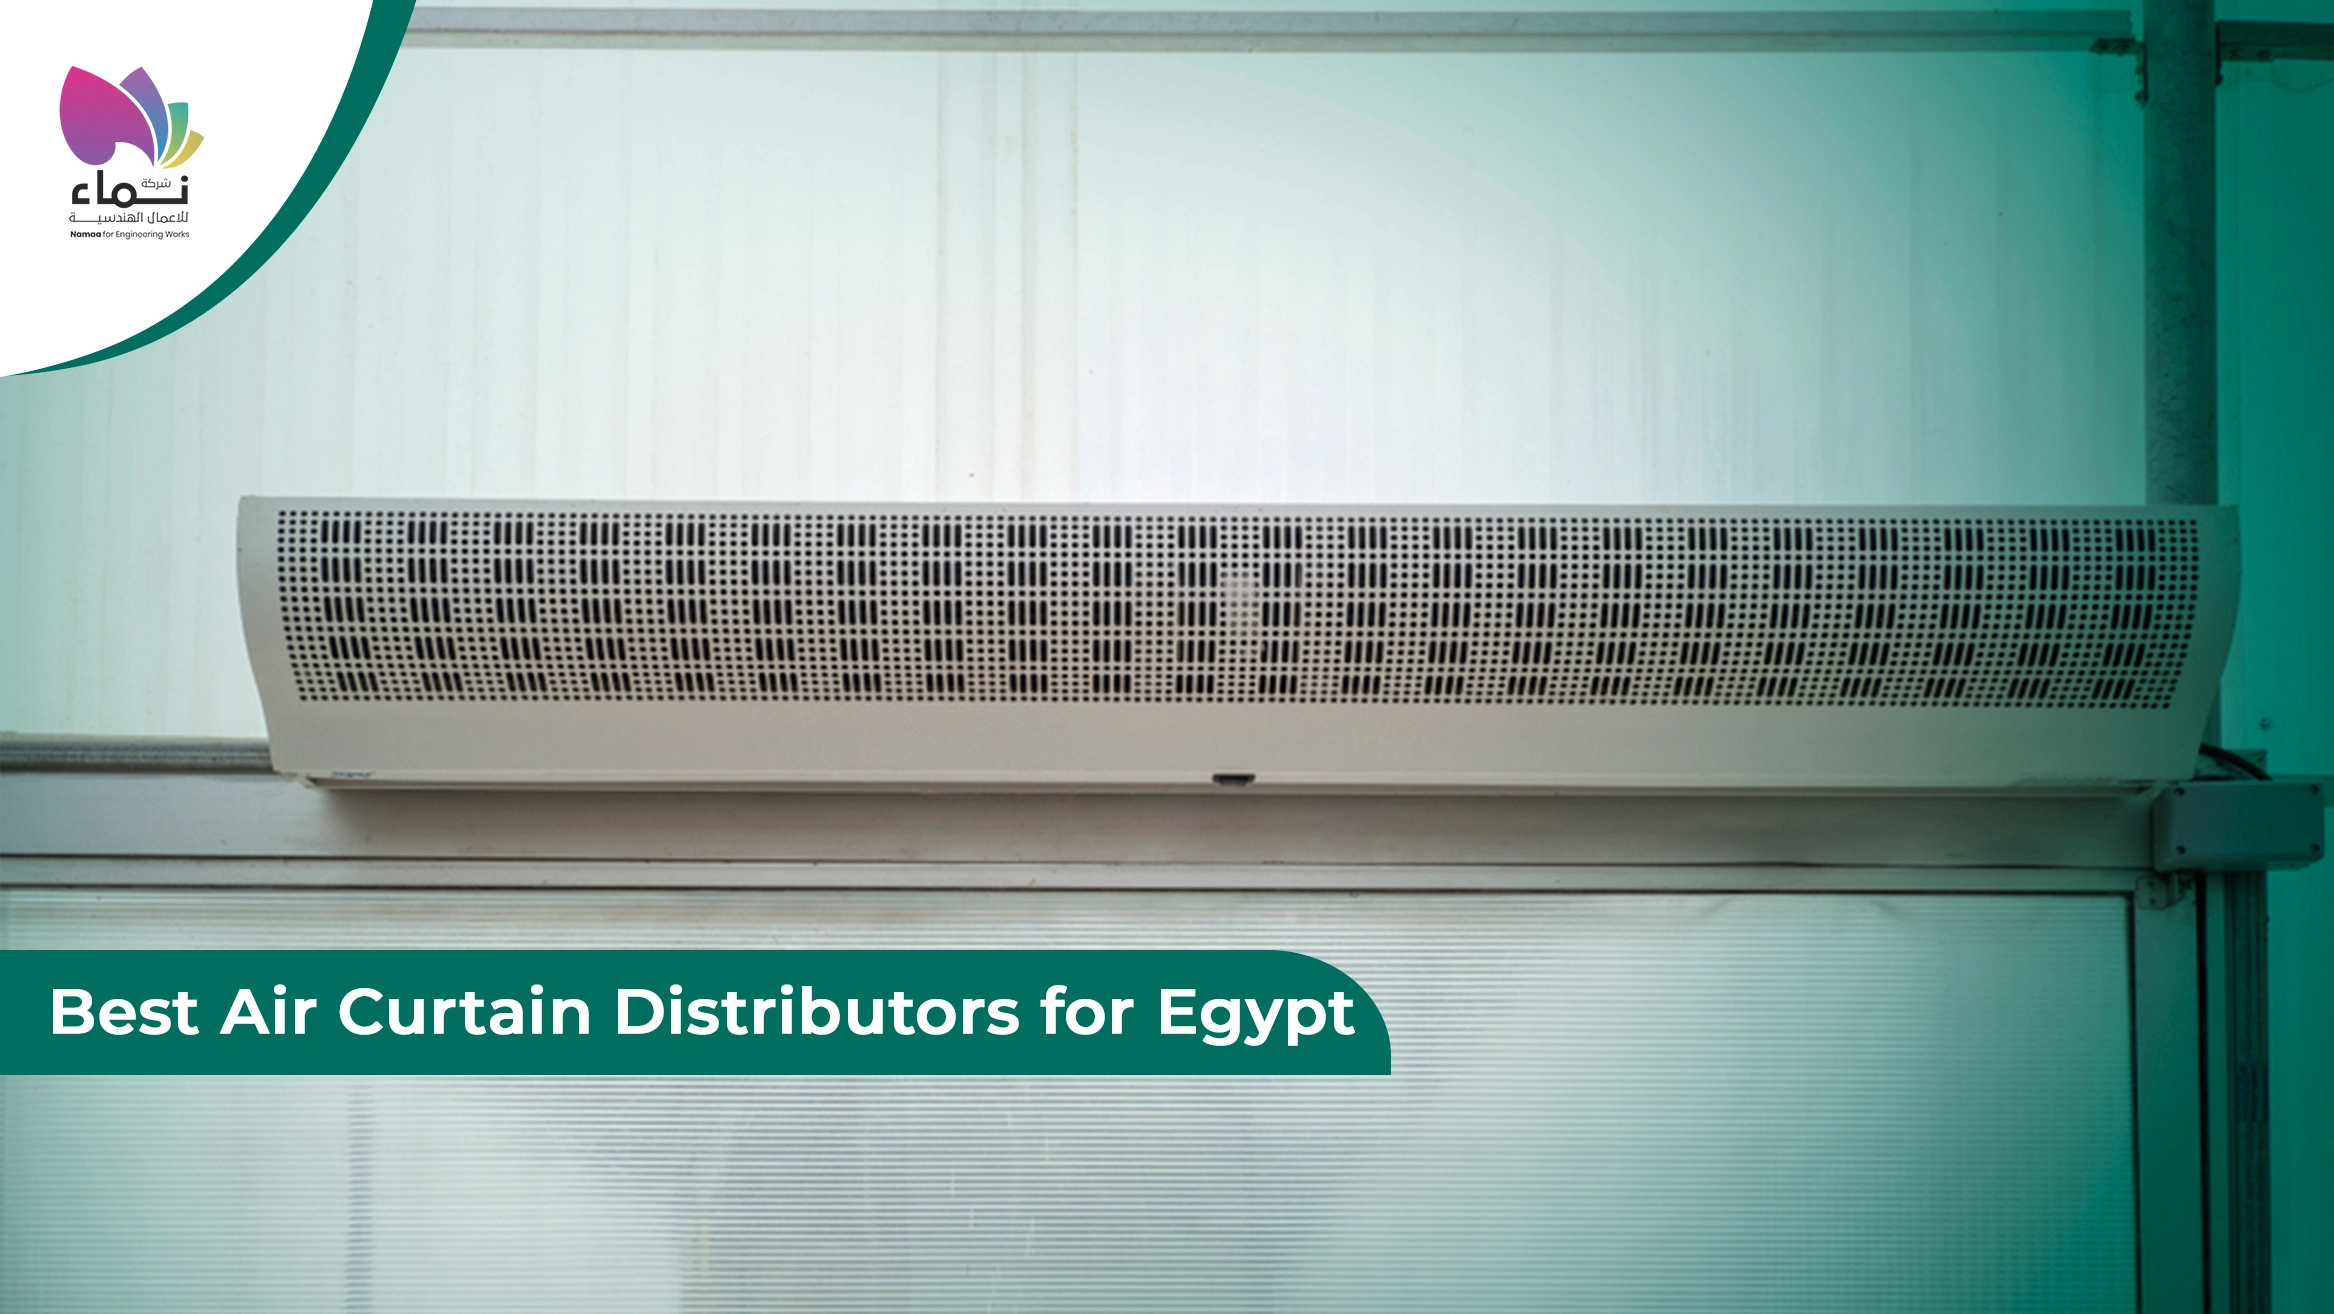 Best Air Curtain Distributors for Egypt